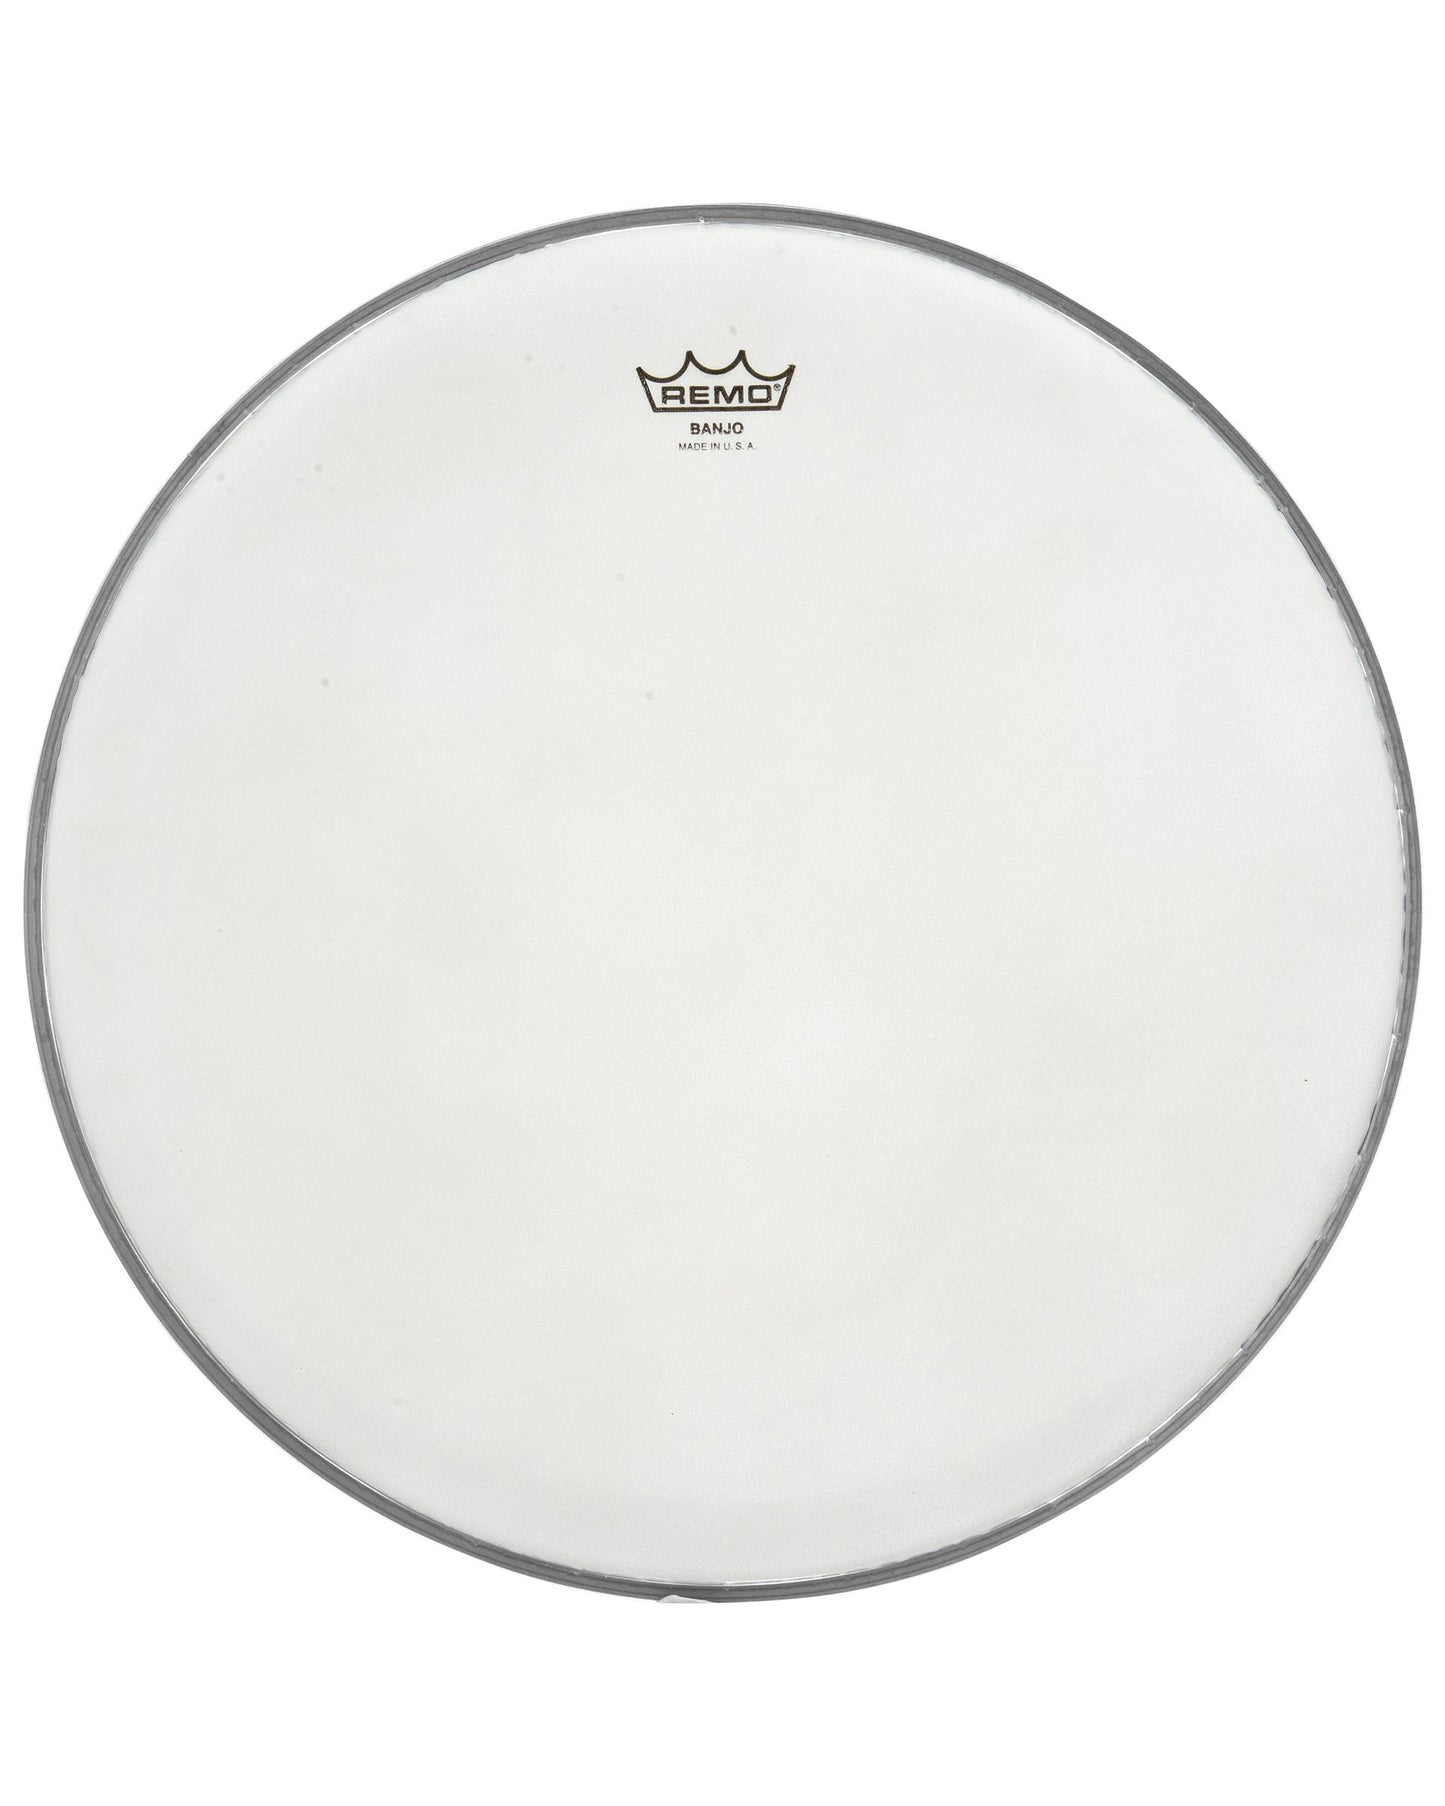 Image 1 of Remo Frosted Bottom Banjo Head, 10 1/2 Inch Diameter, Medium Crown (7/16 Inch) - - SKU# B1008-M-FRB : Product Type Accessories & Parts : Elderly Instruments